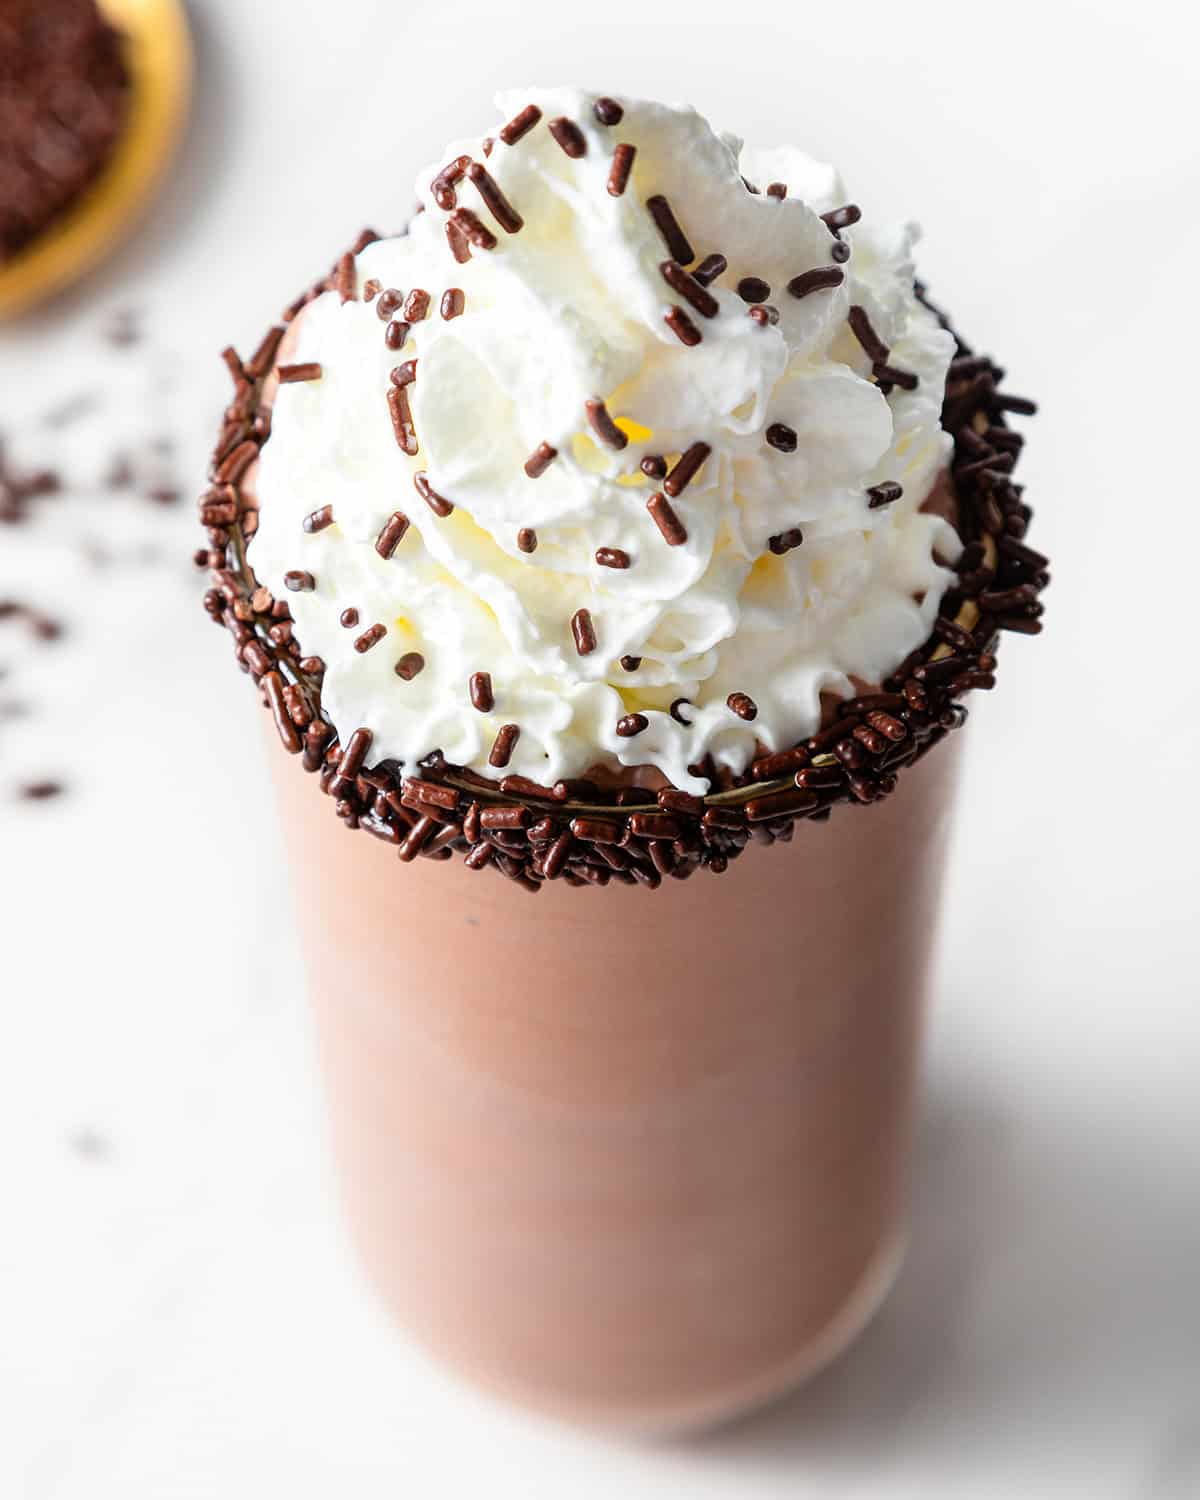 chocolate milkshake in a glass topped with whipped cream and chocolate sprinkles